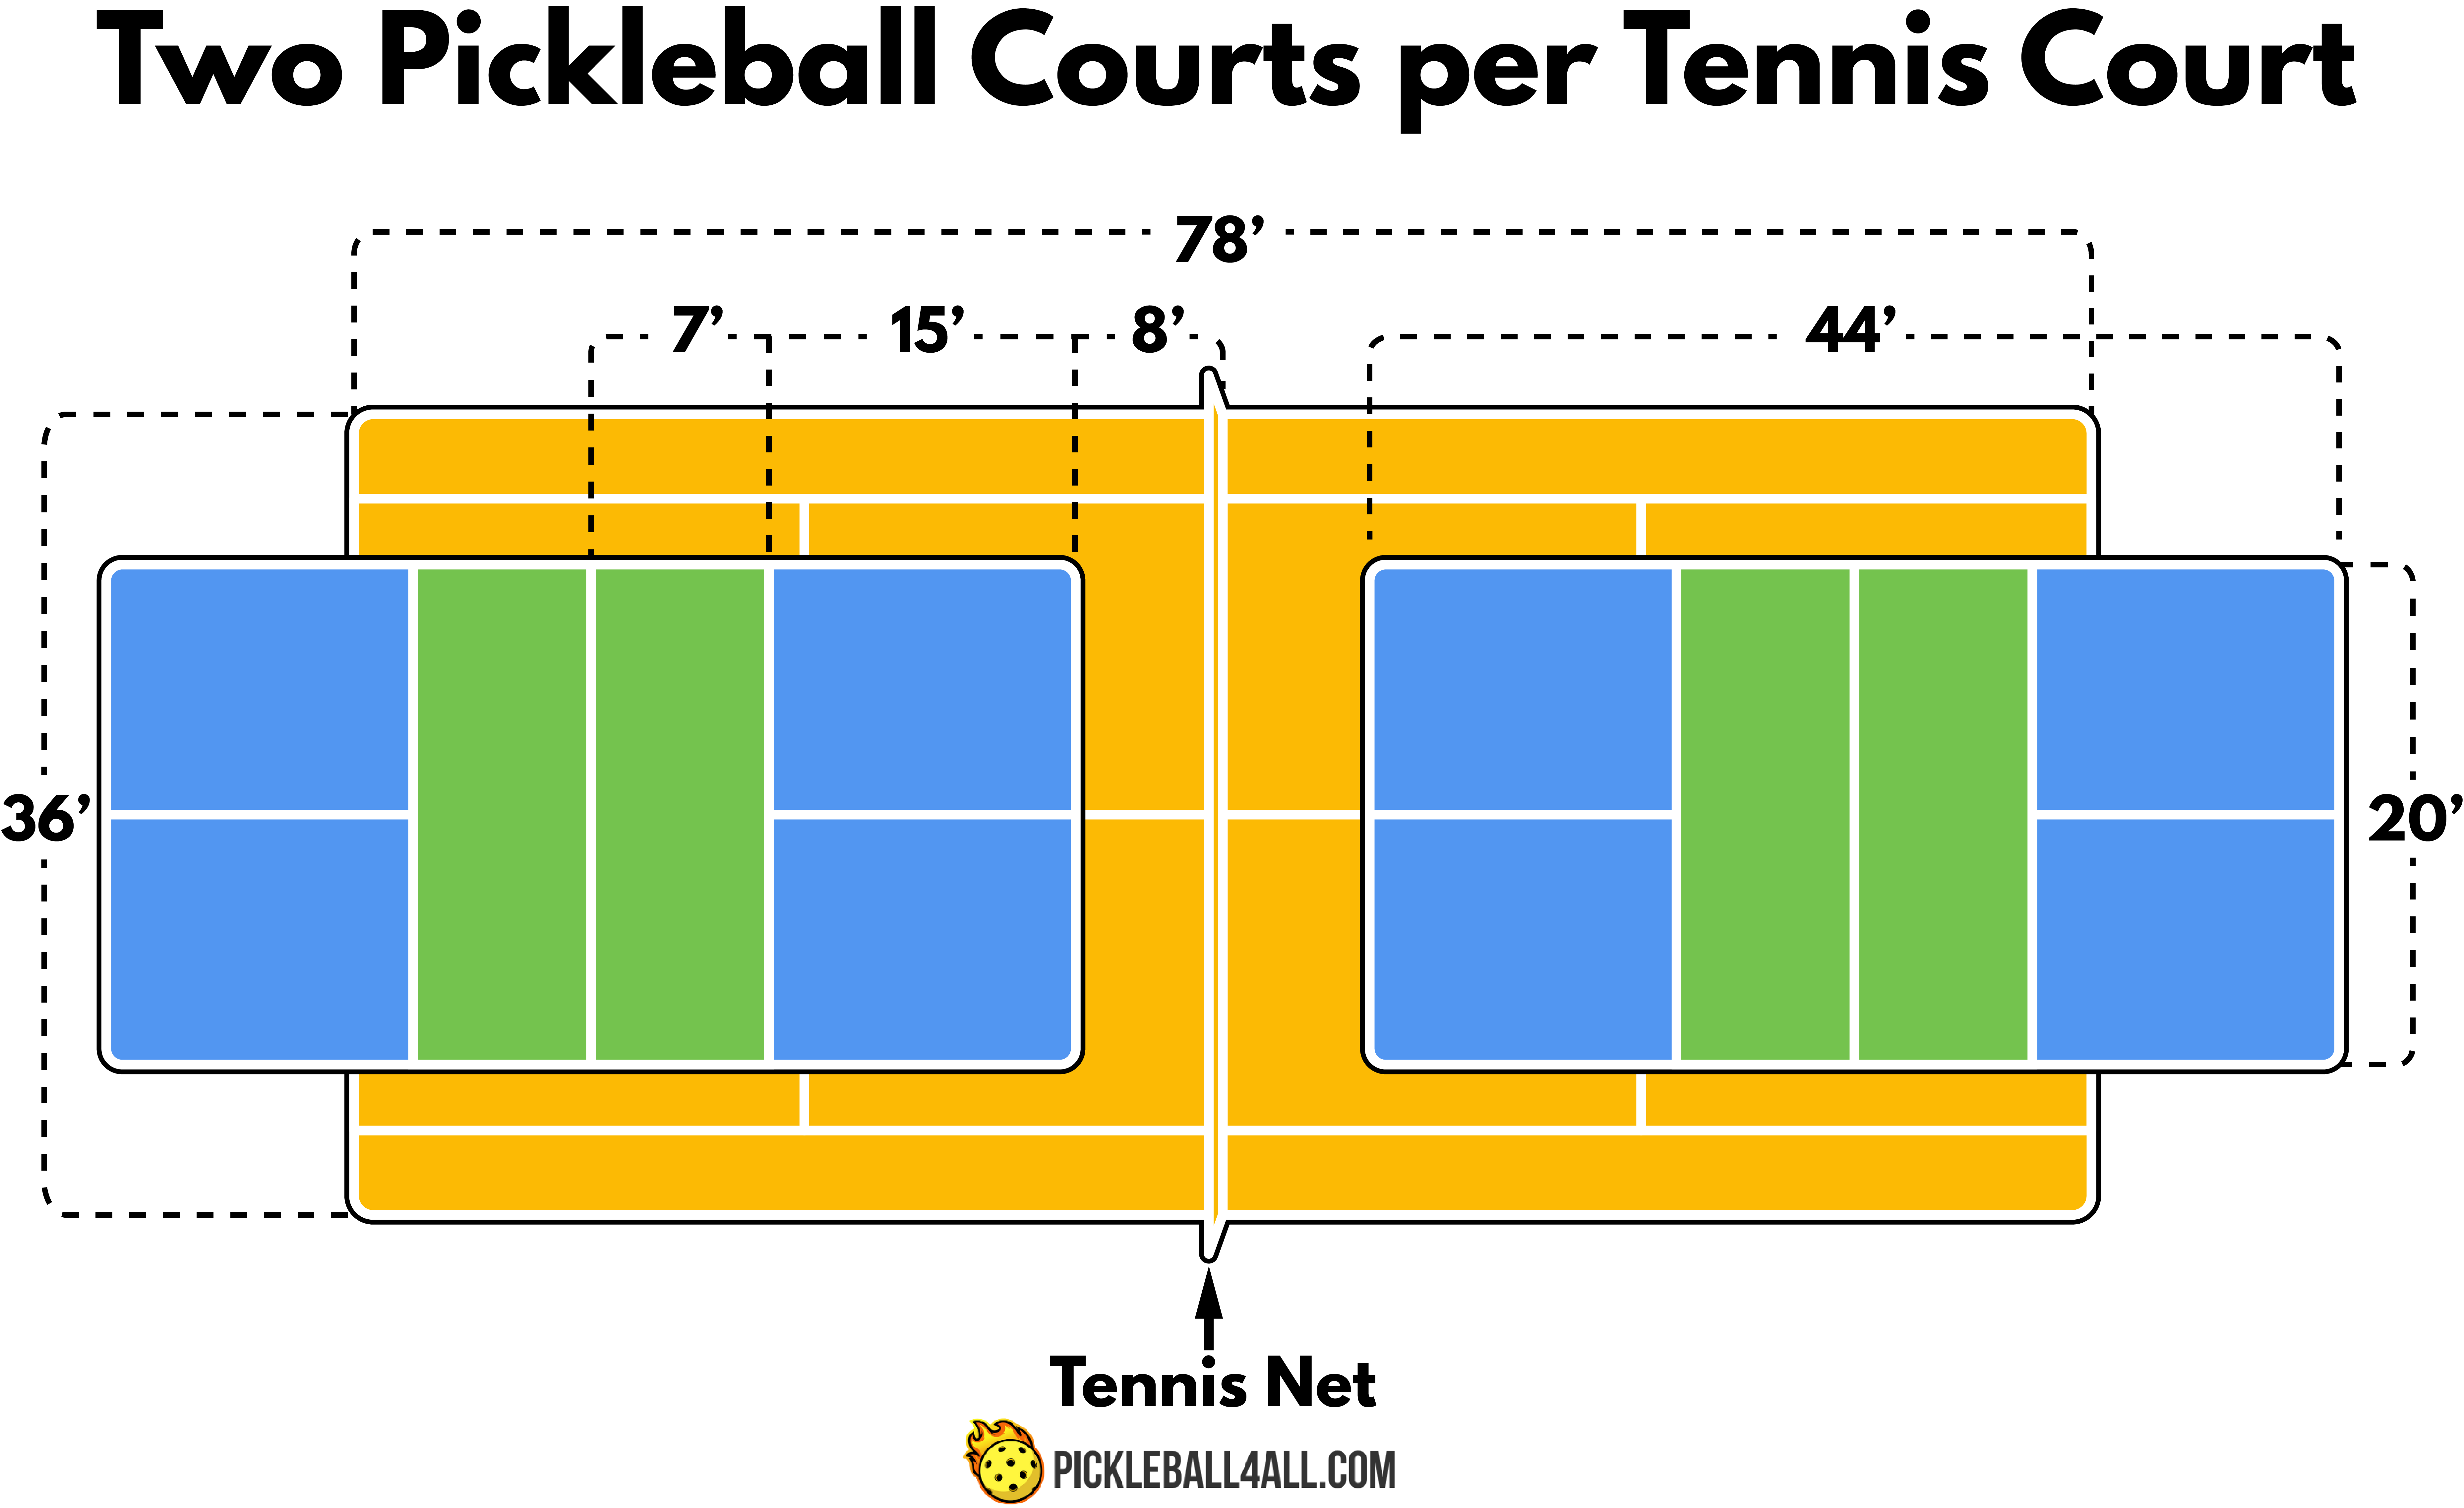 Two Pickleball Courts per Tennis Court